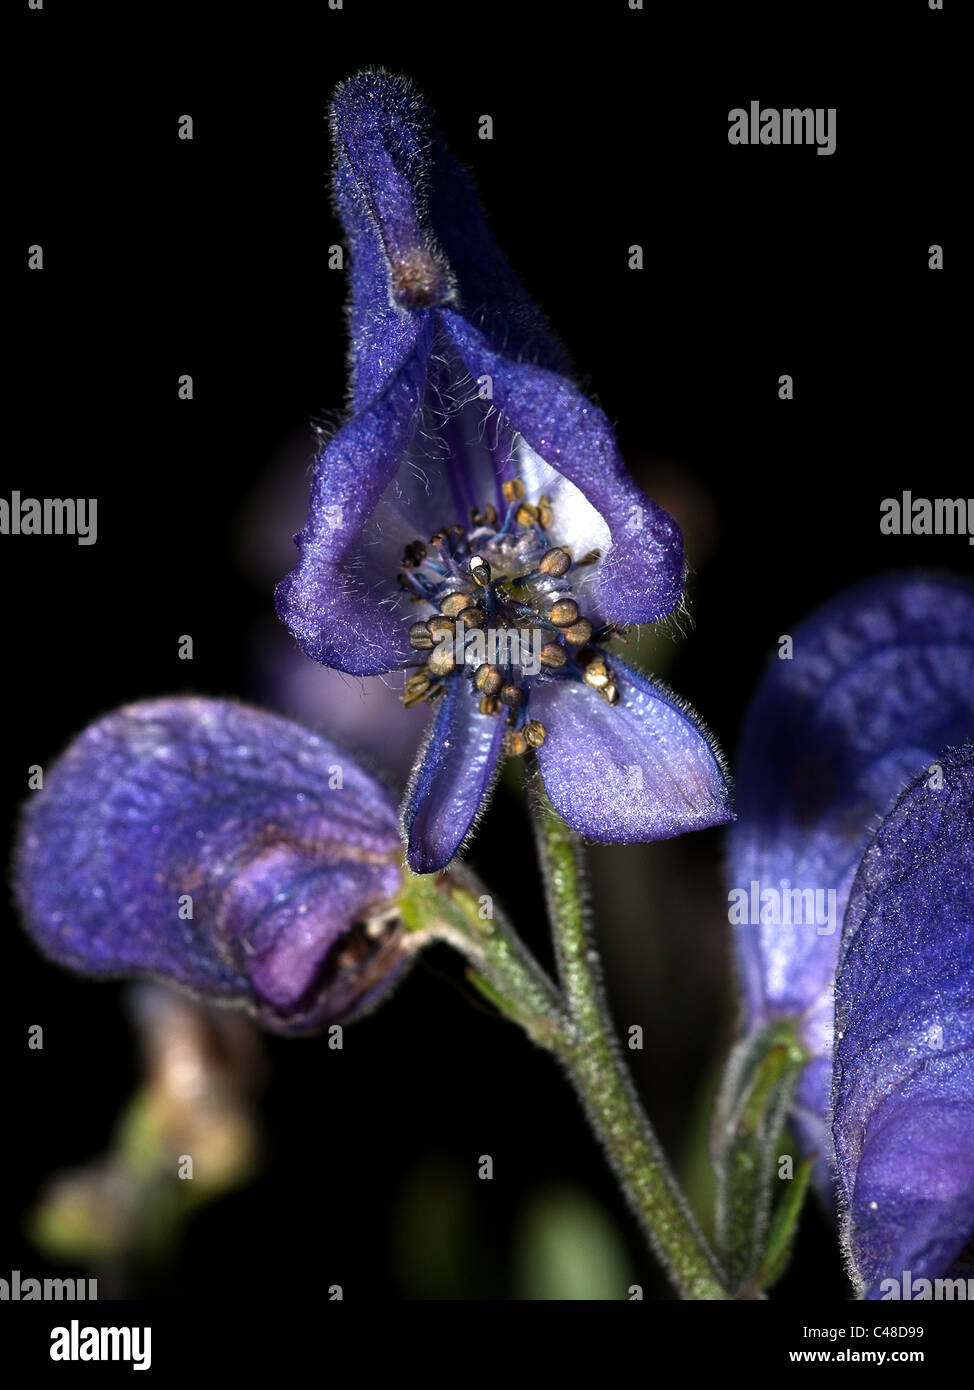 Aconitum napellus, monkshood, vertical portrait of flower with nice out of focus background. Stock Photo